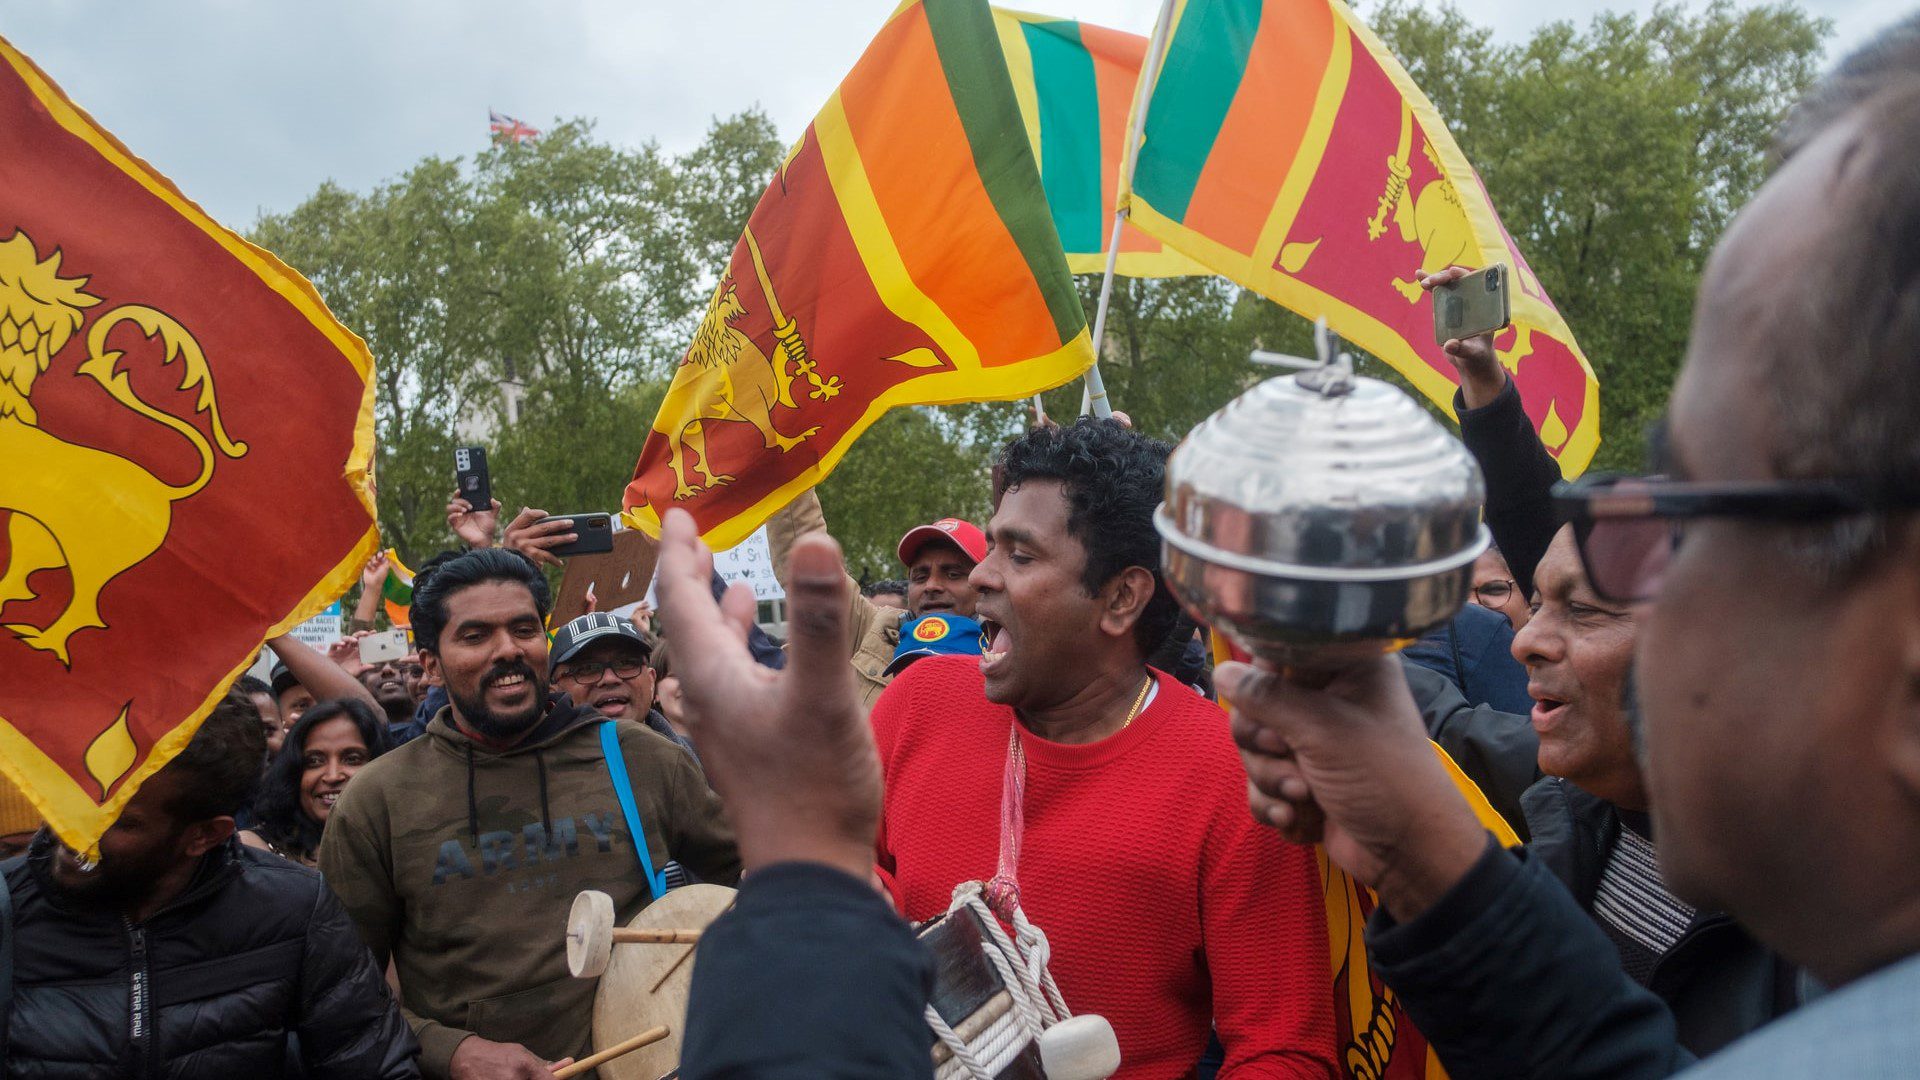 Amid the worst economic crisis in Sri Lankan history, people have taken to the streets like never before, uniting in the face of adversity